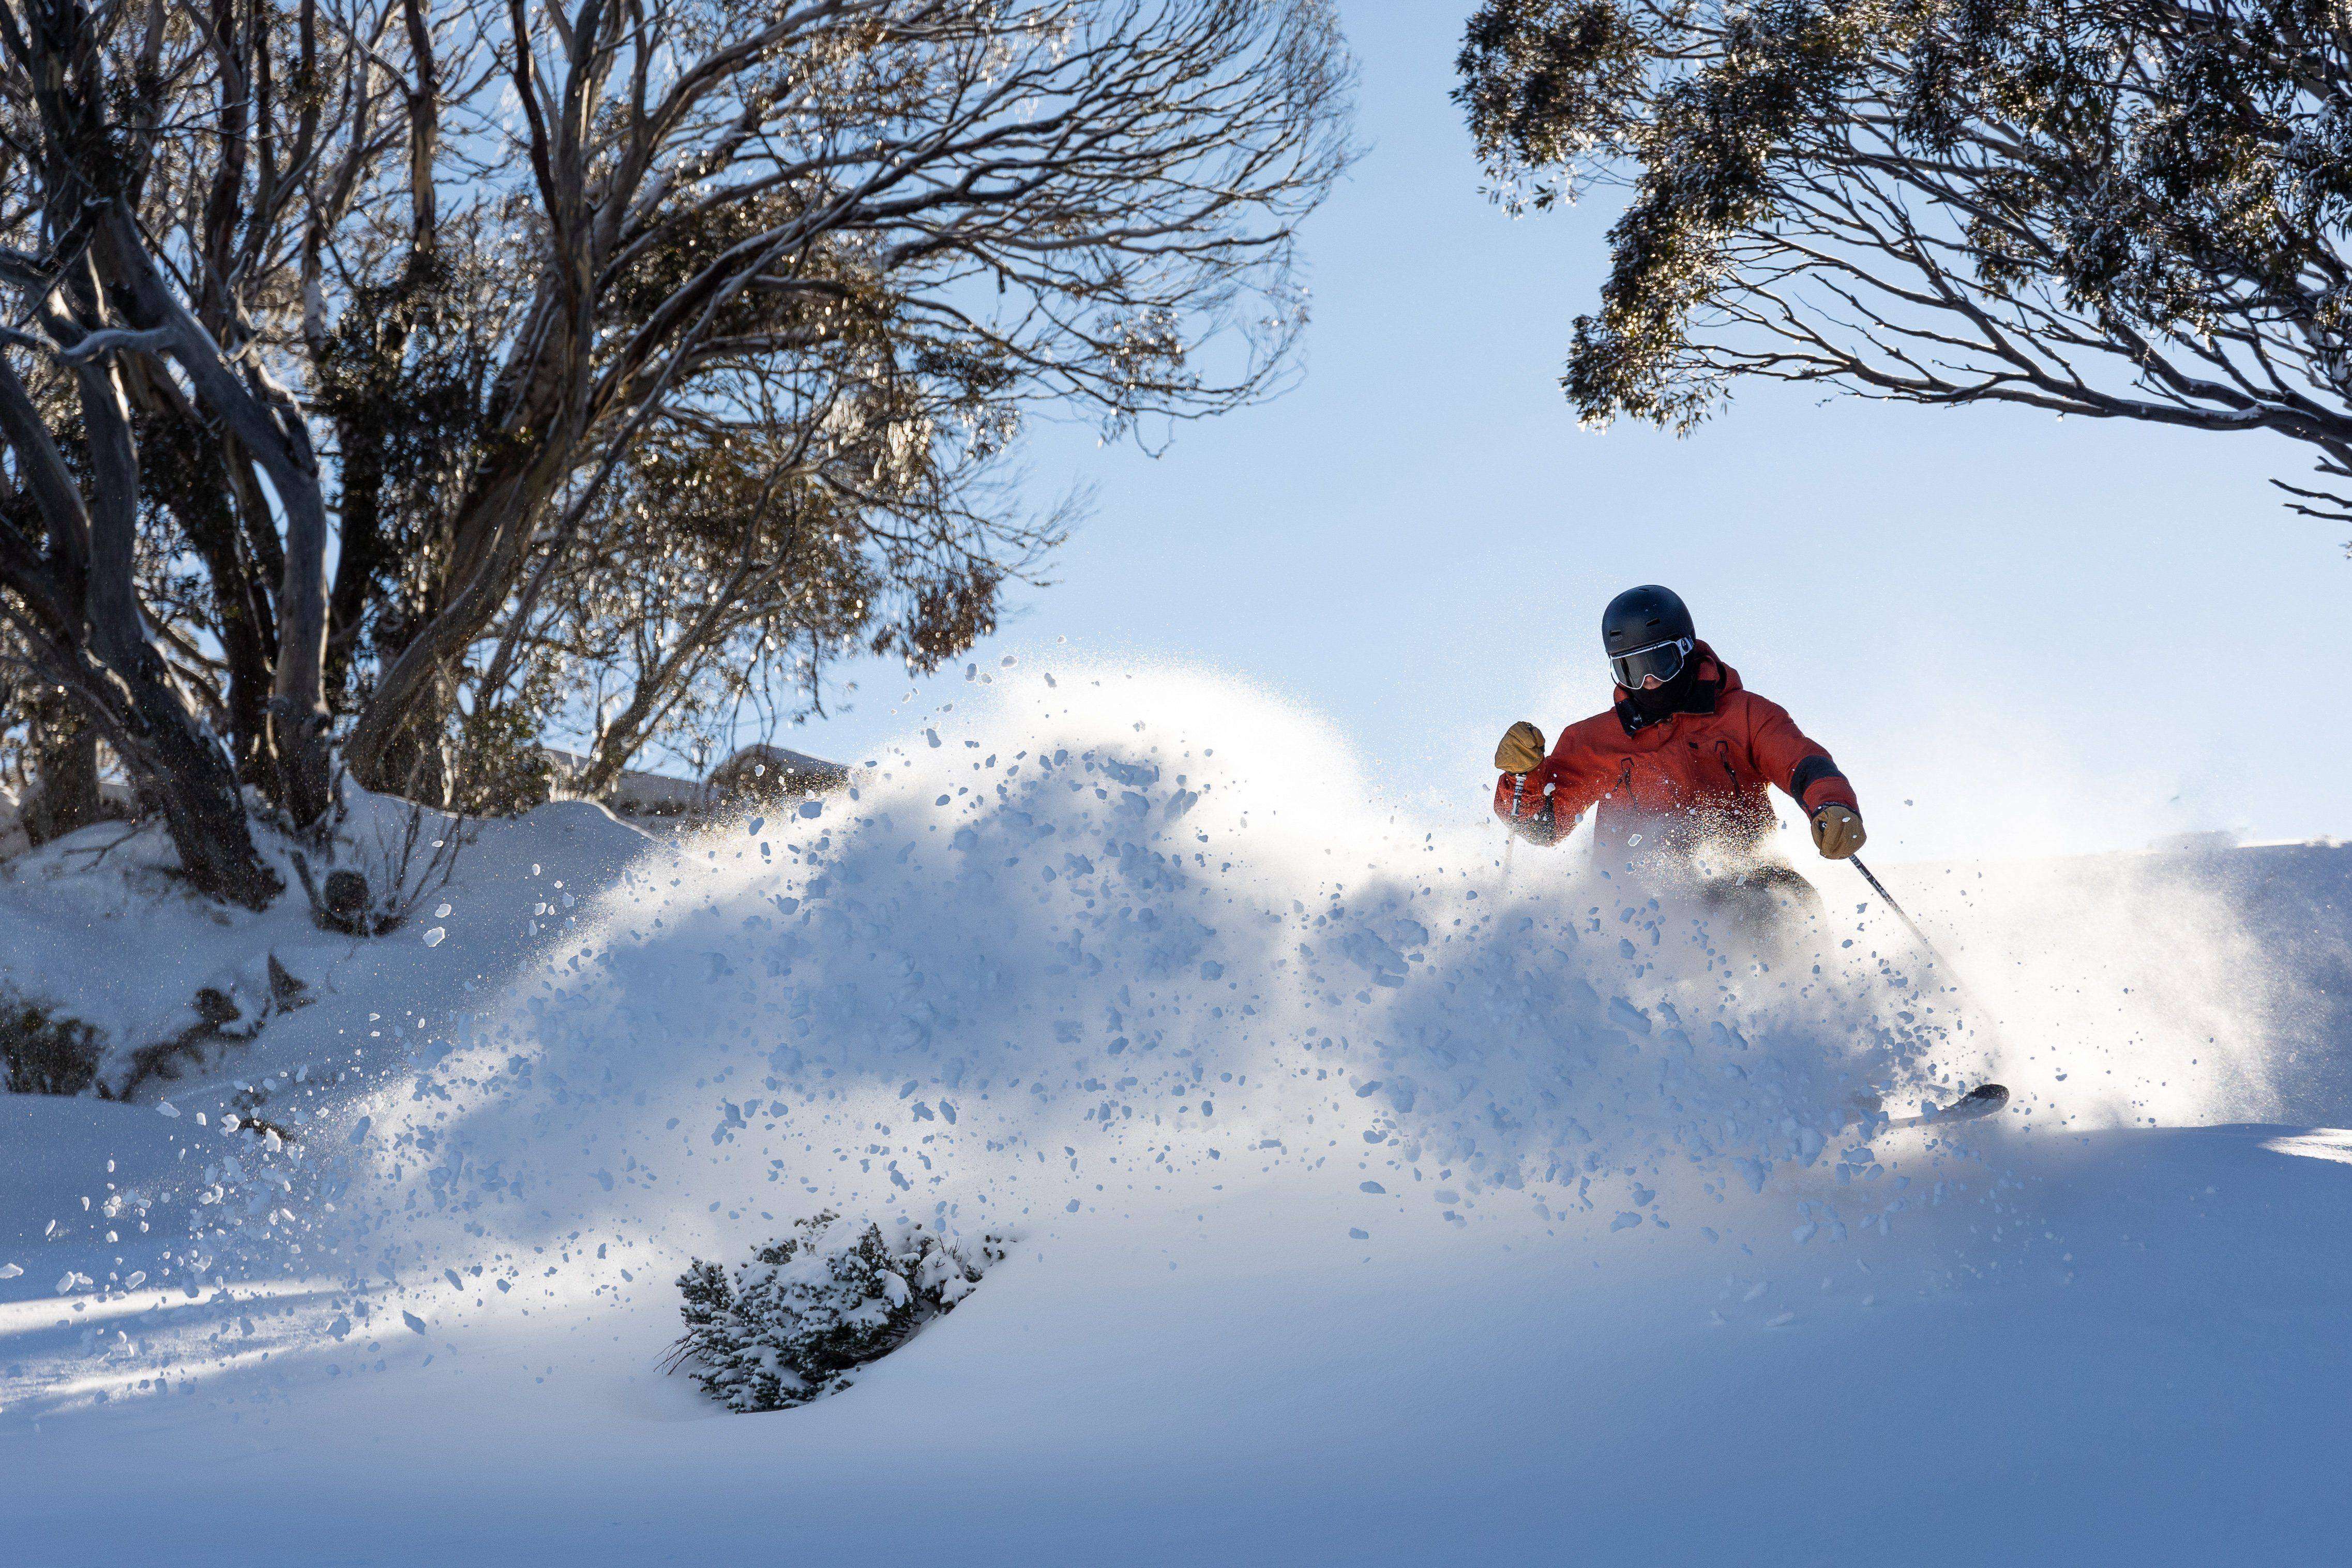 Deepest natural snow in years but high-country businesses crying out for visitors